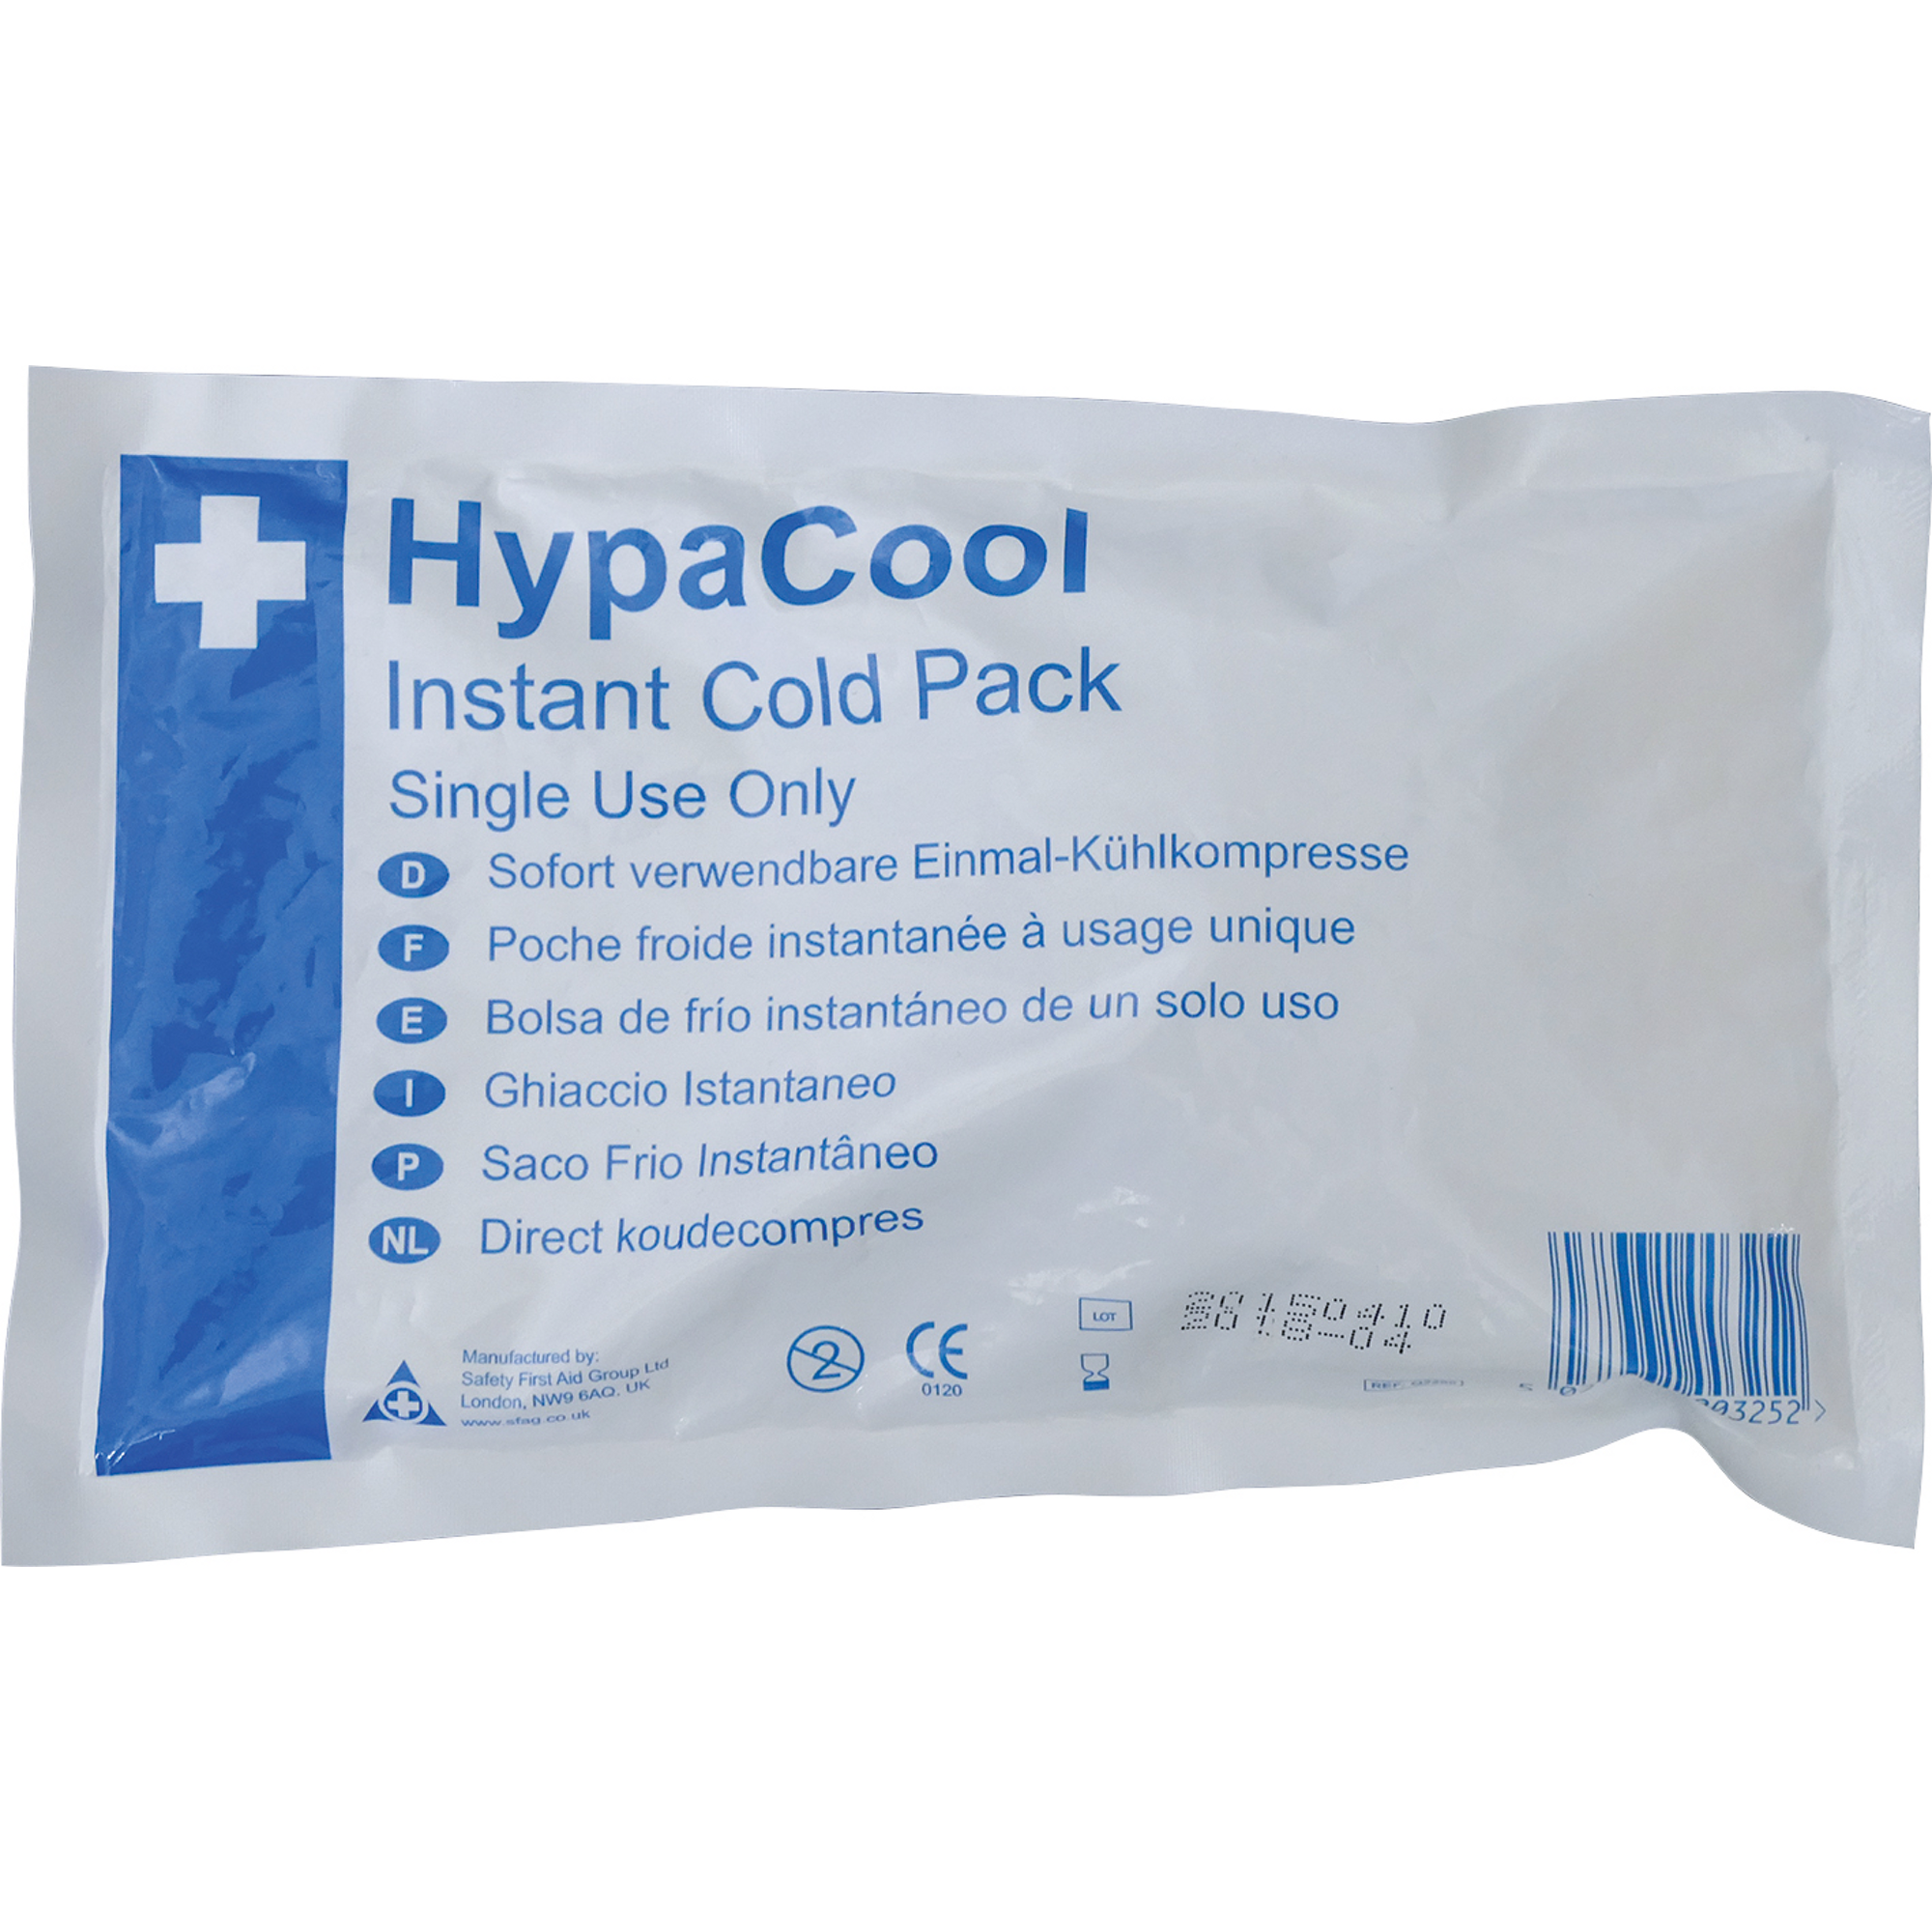 where to get ice packs